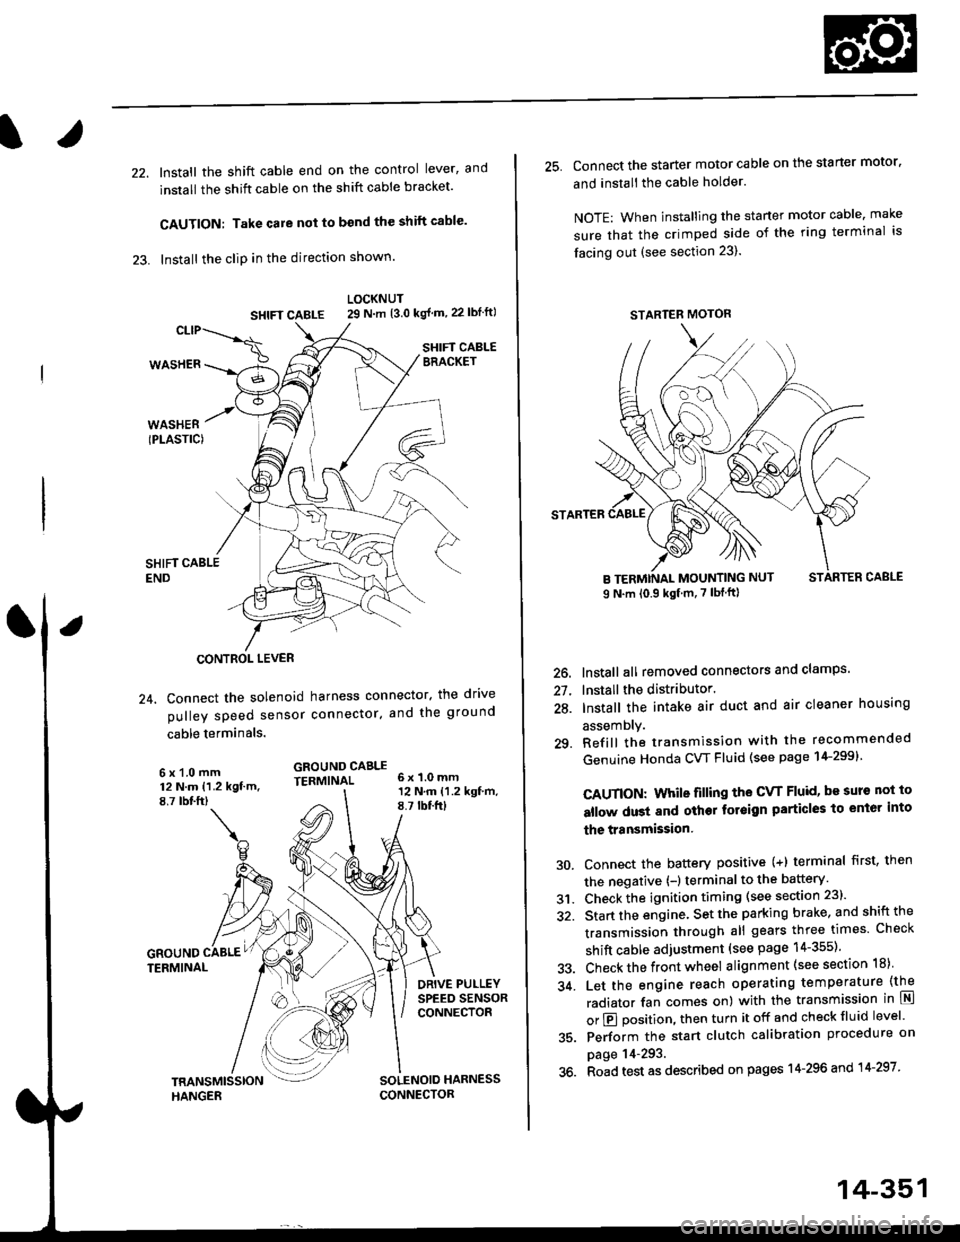 HONDA CIVIC 1996 6.G Workshop Manual 22. Install the shift cable end on the control lever, and
install the shift cable on the shift cable bracket
CAUTION: Take care not to bend the shift cable
23. lnstall the clip in the direction show